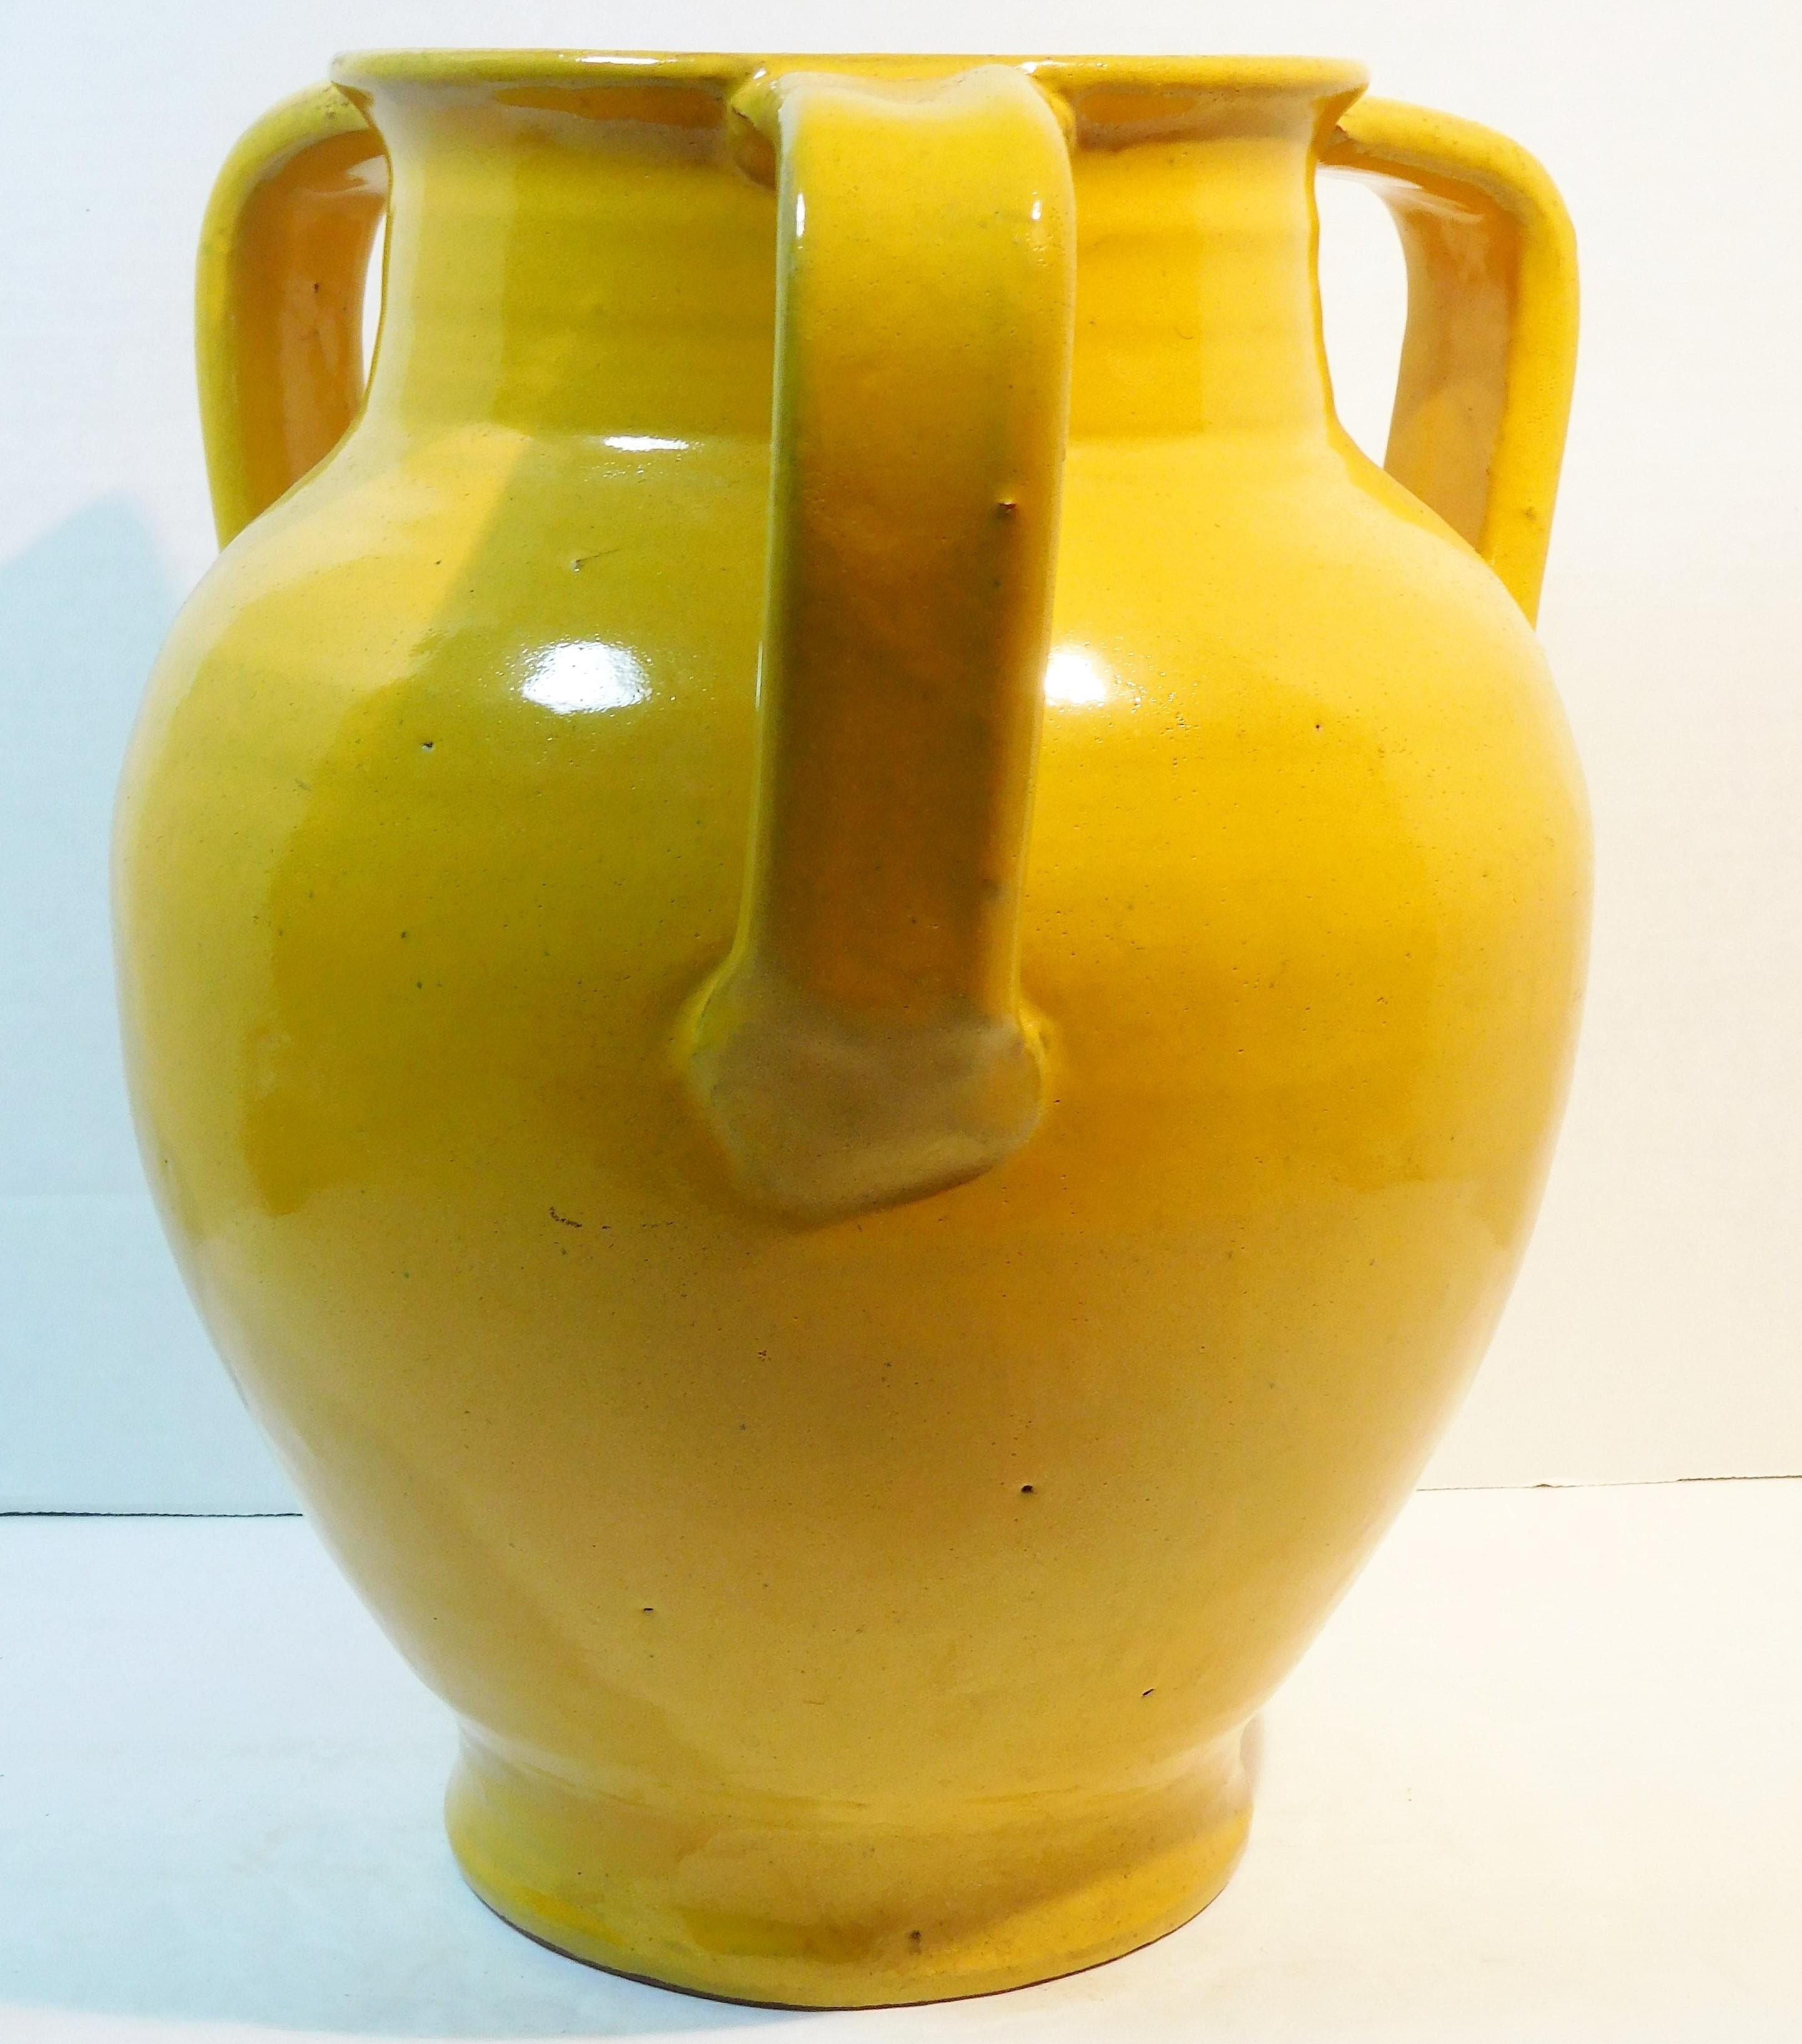 This large table vase made from red clay has a Chinese yellow glaze and three applied handles. On the bottom, it has unravelled-screen-wire marks which reveal its age since this technique of cutting the pot from the throwing wheel was used by North